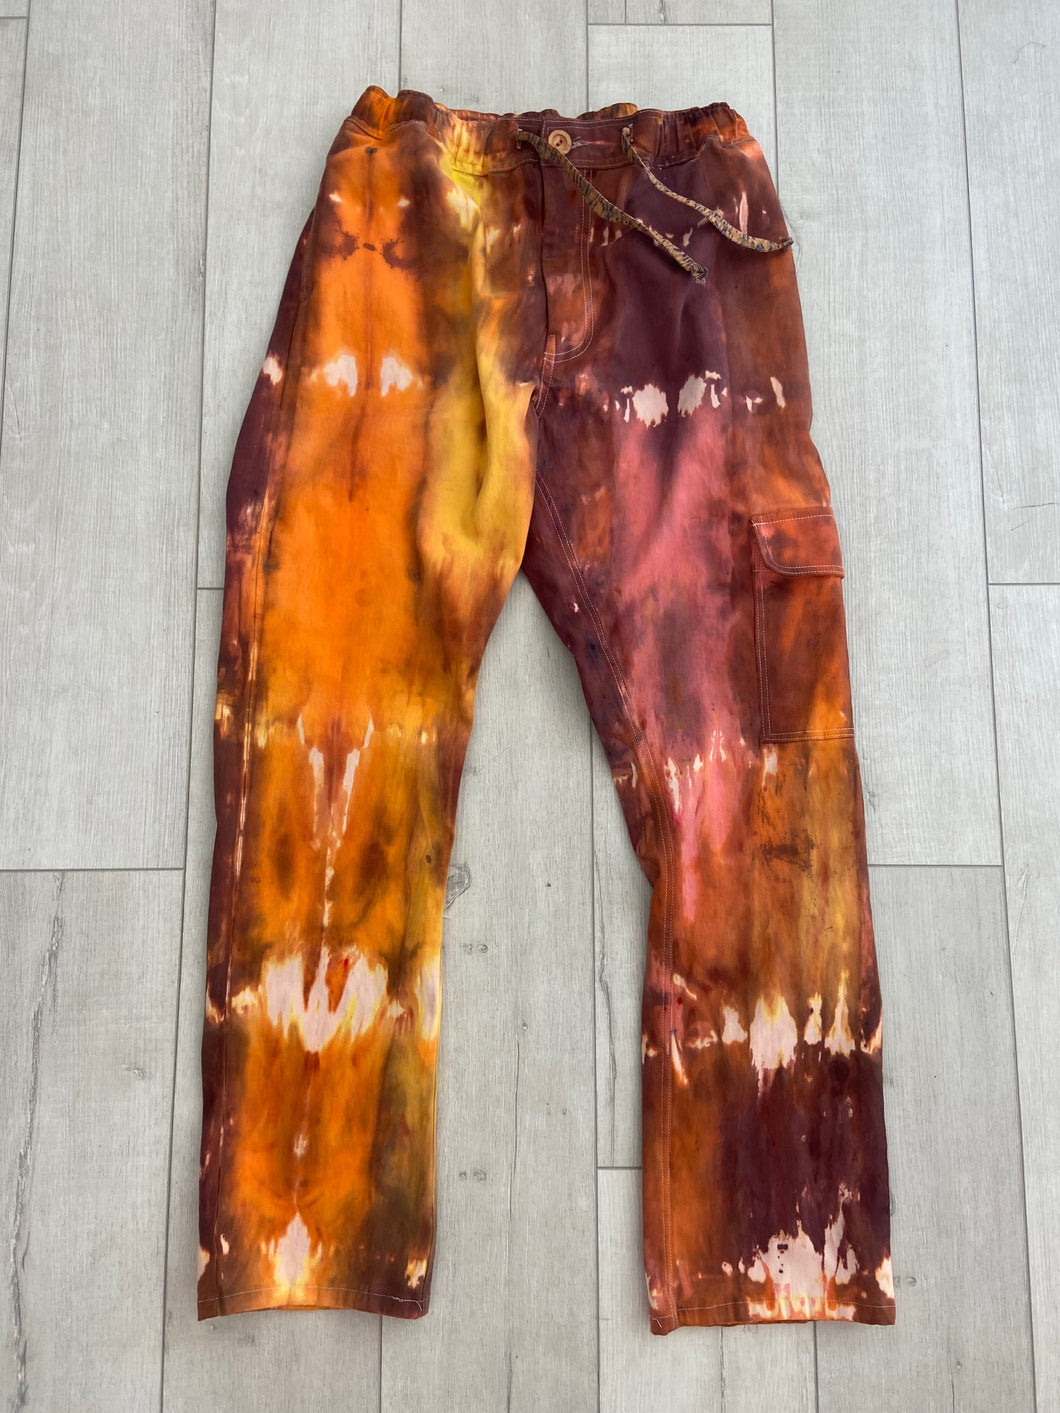 Sungodz Tie-Dye Jam Pant in one of kind 